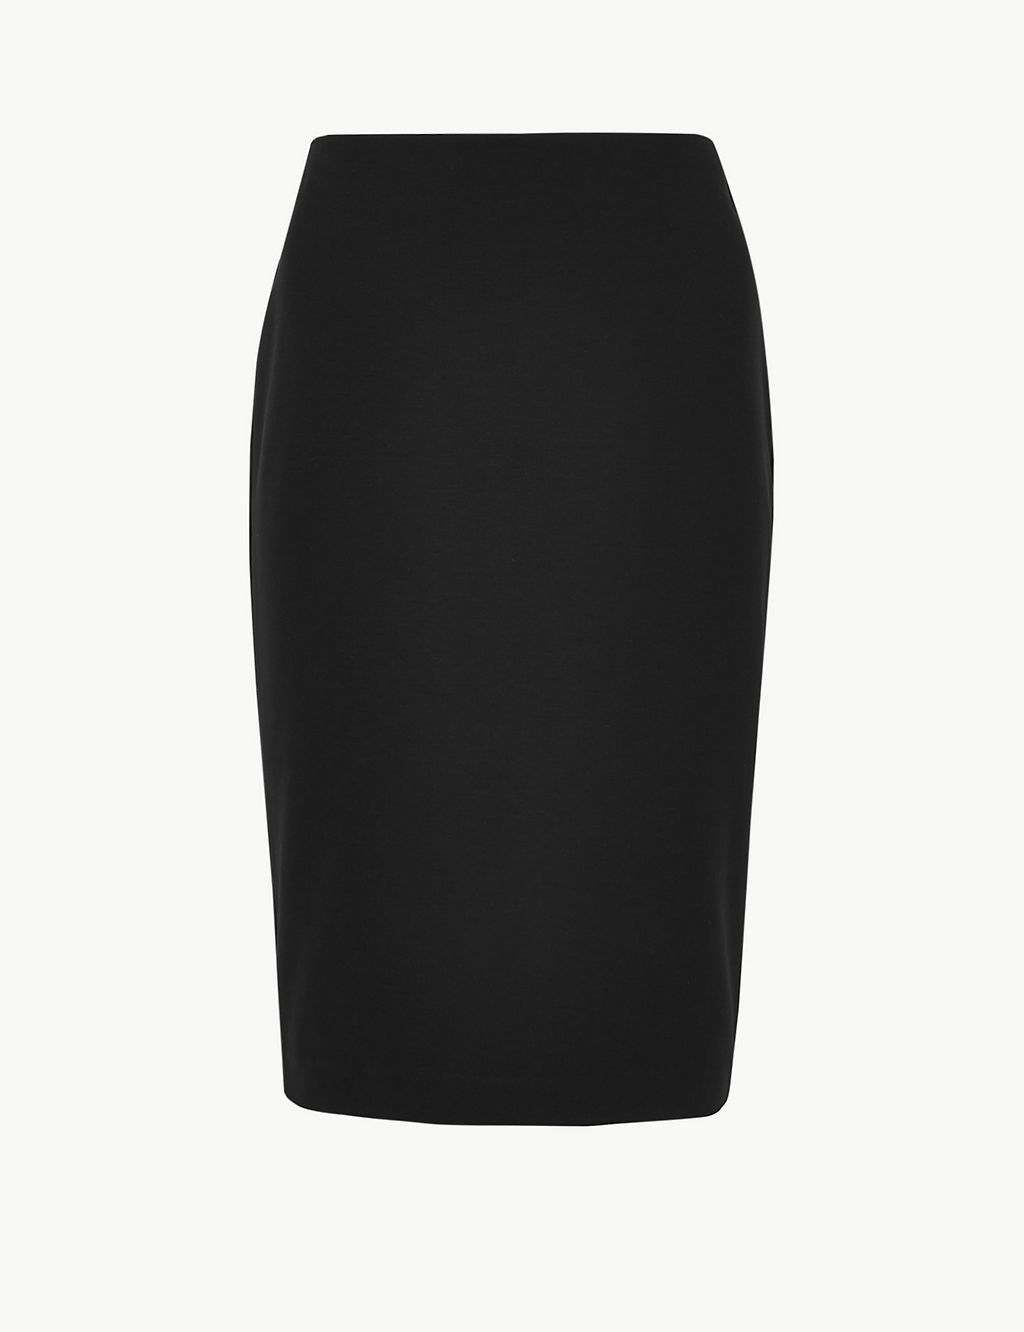 Midi Pencil Skirt | M&S Collection | M&S